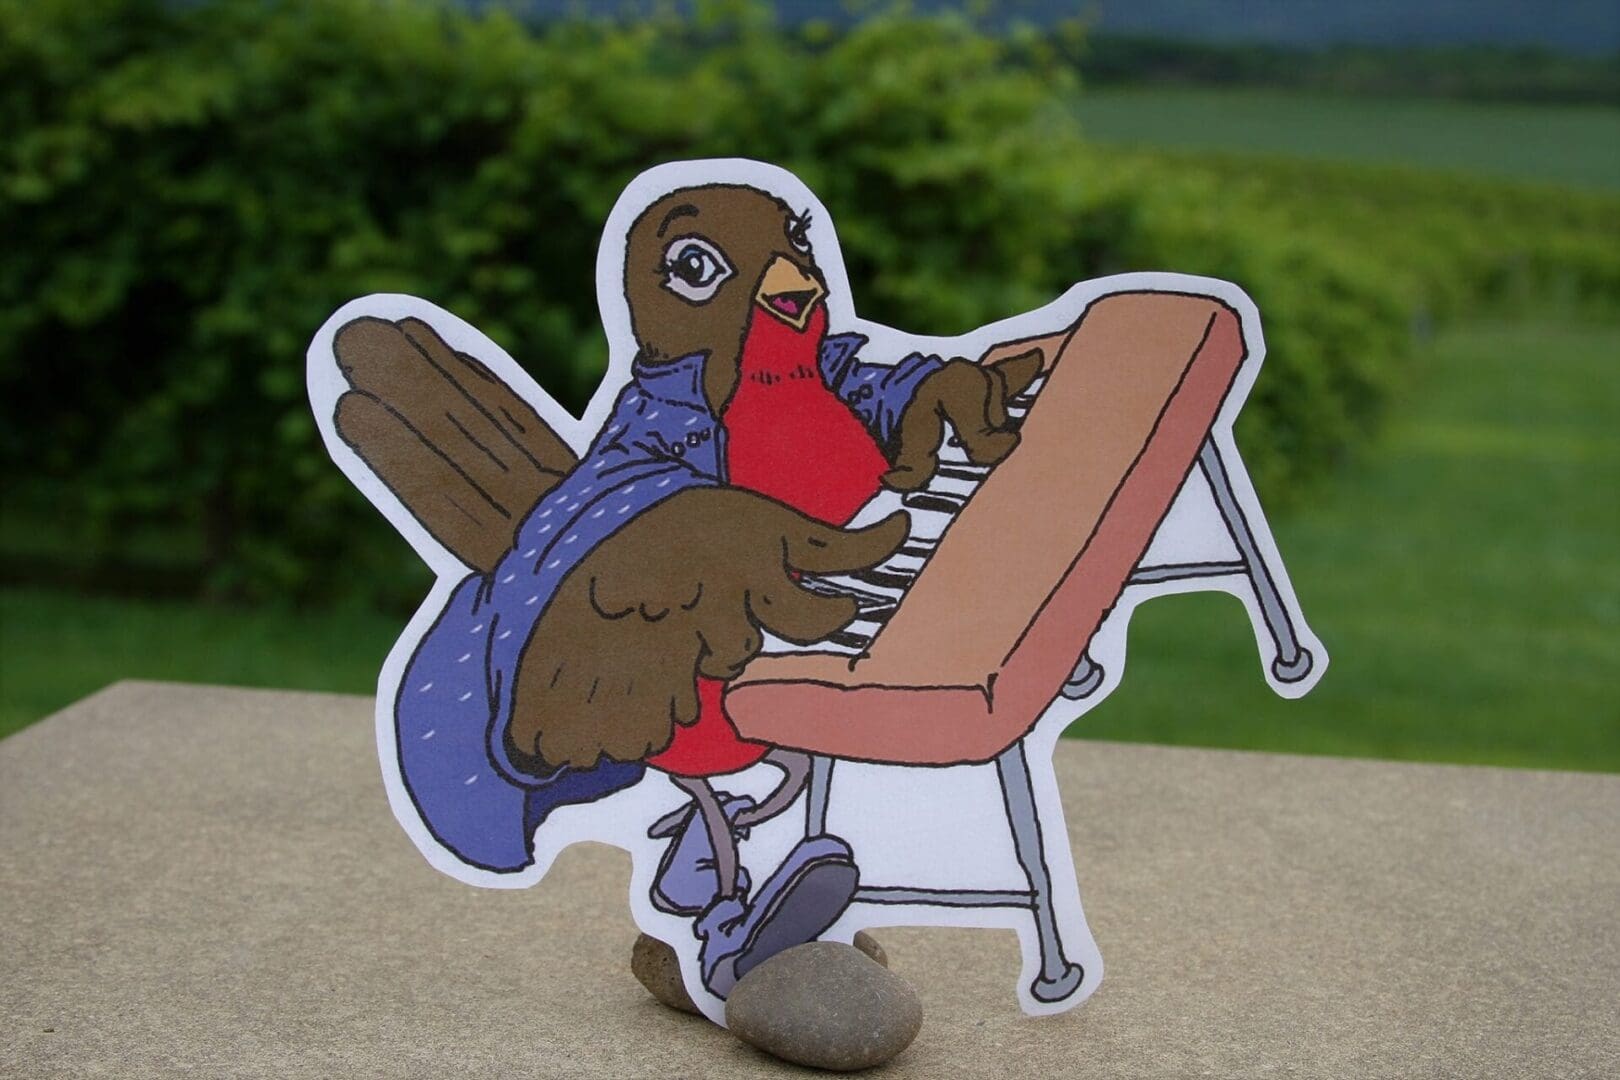 A paper cut out of a robin playing a piano.